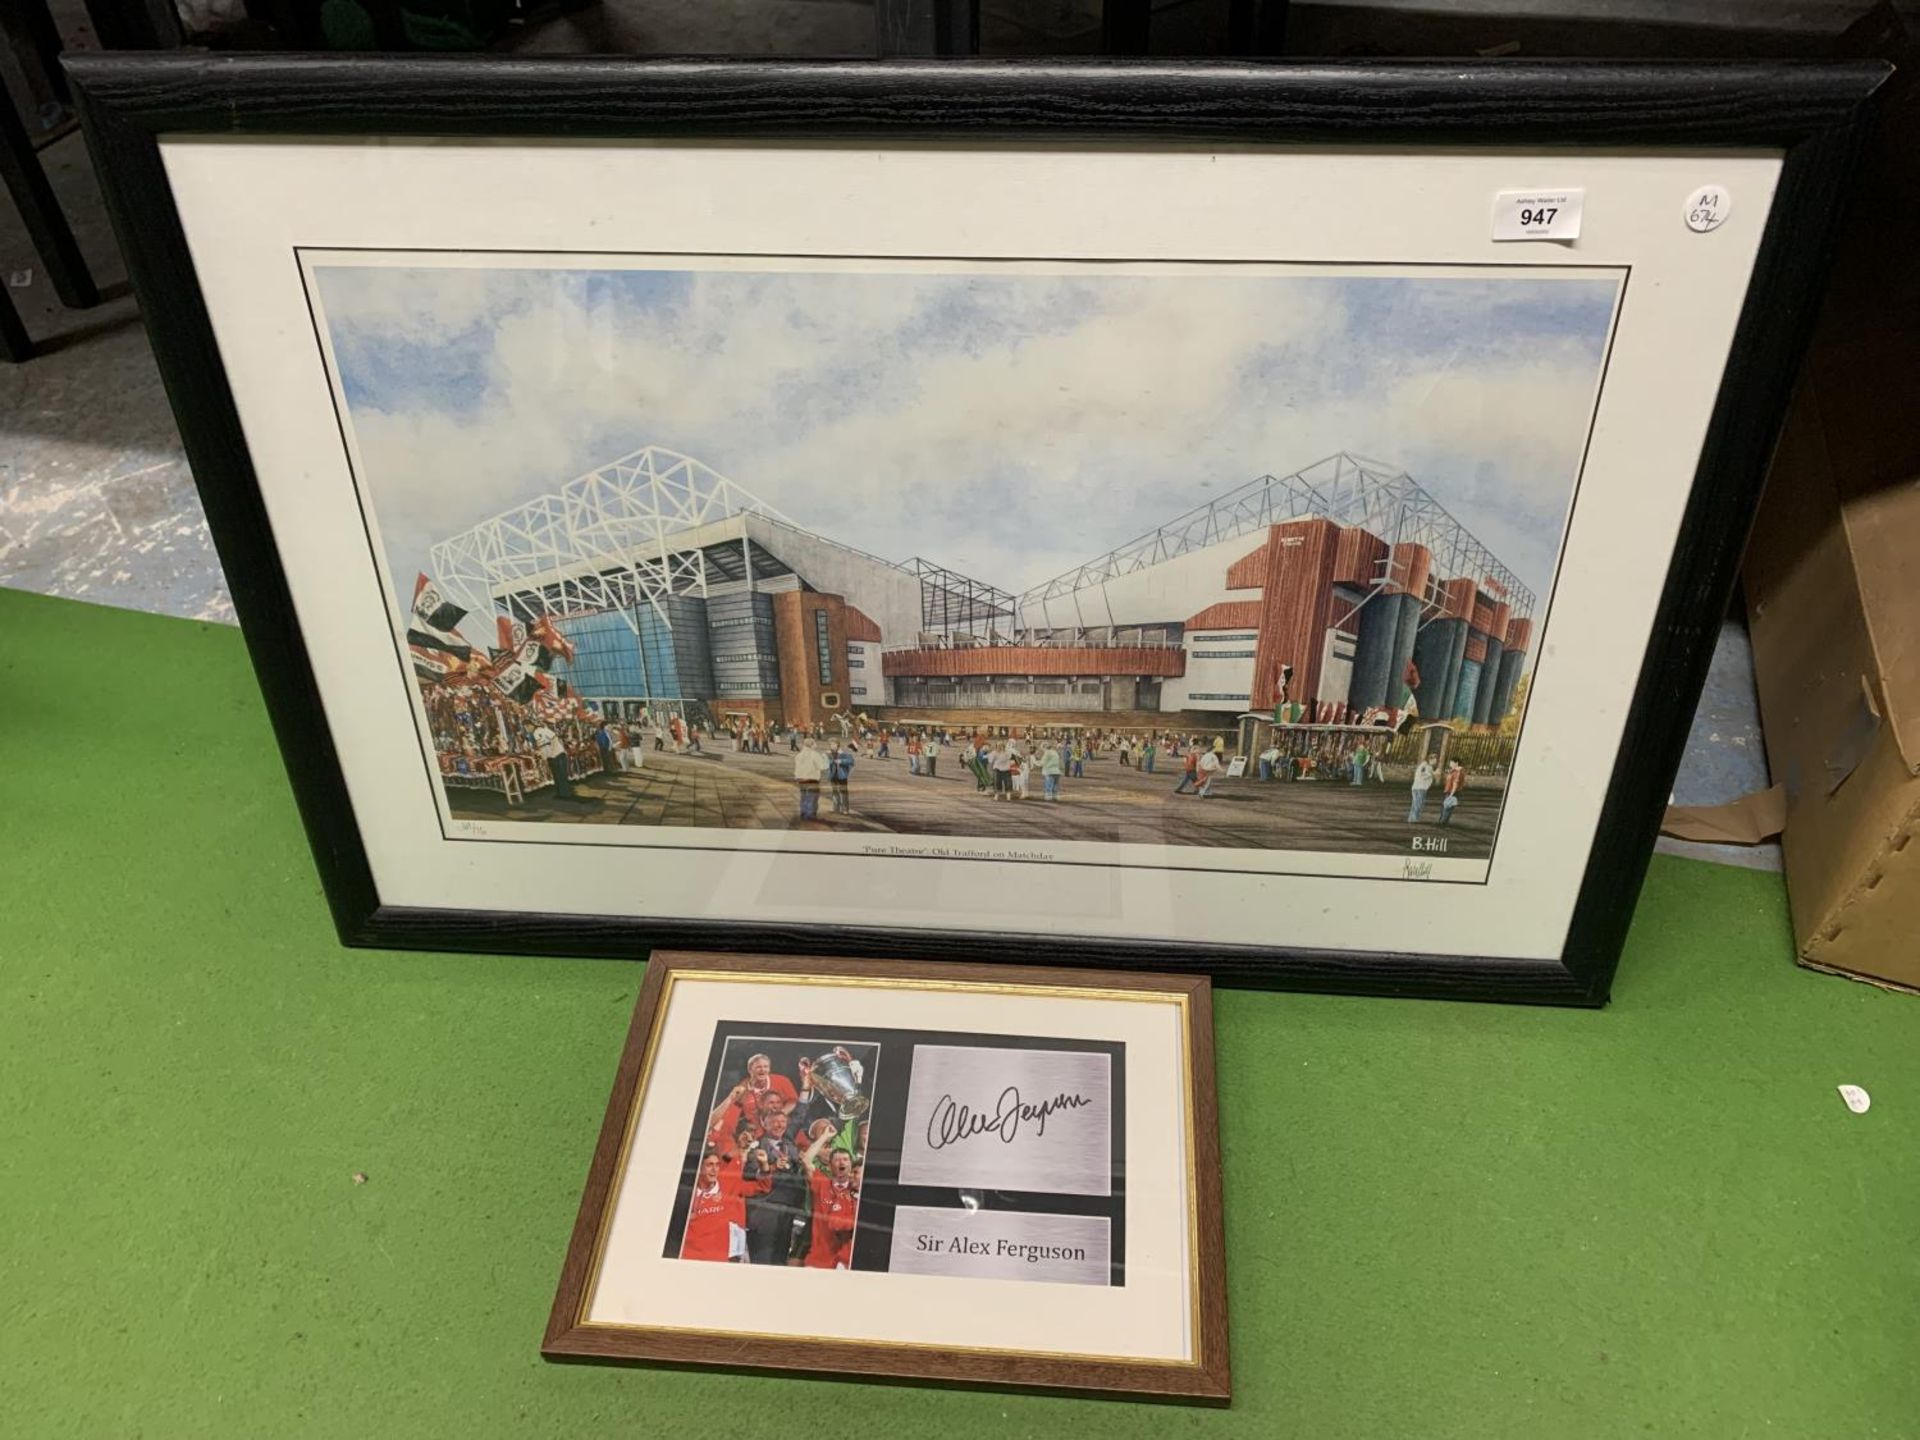 A LIMITED EDITION SIGNED PRINT 'PURE THEATRE' BY B.HILL OF OLD TRAFFORD ON MATCHDAY 169/750 WITH C.